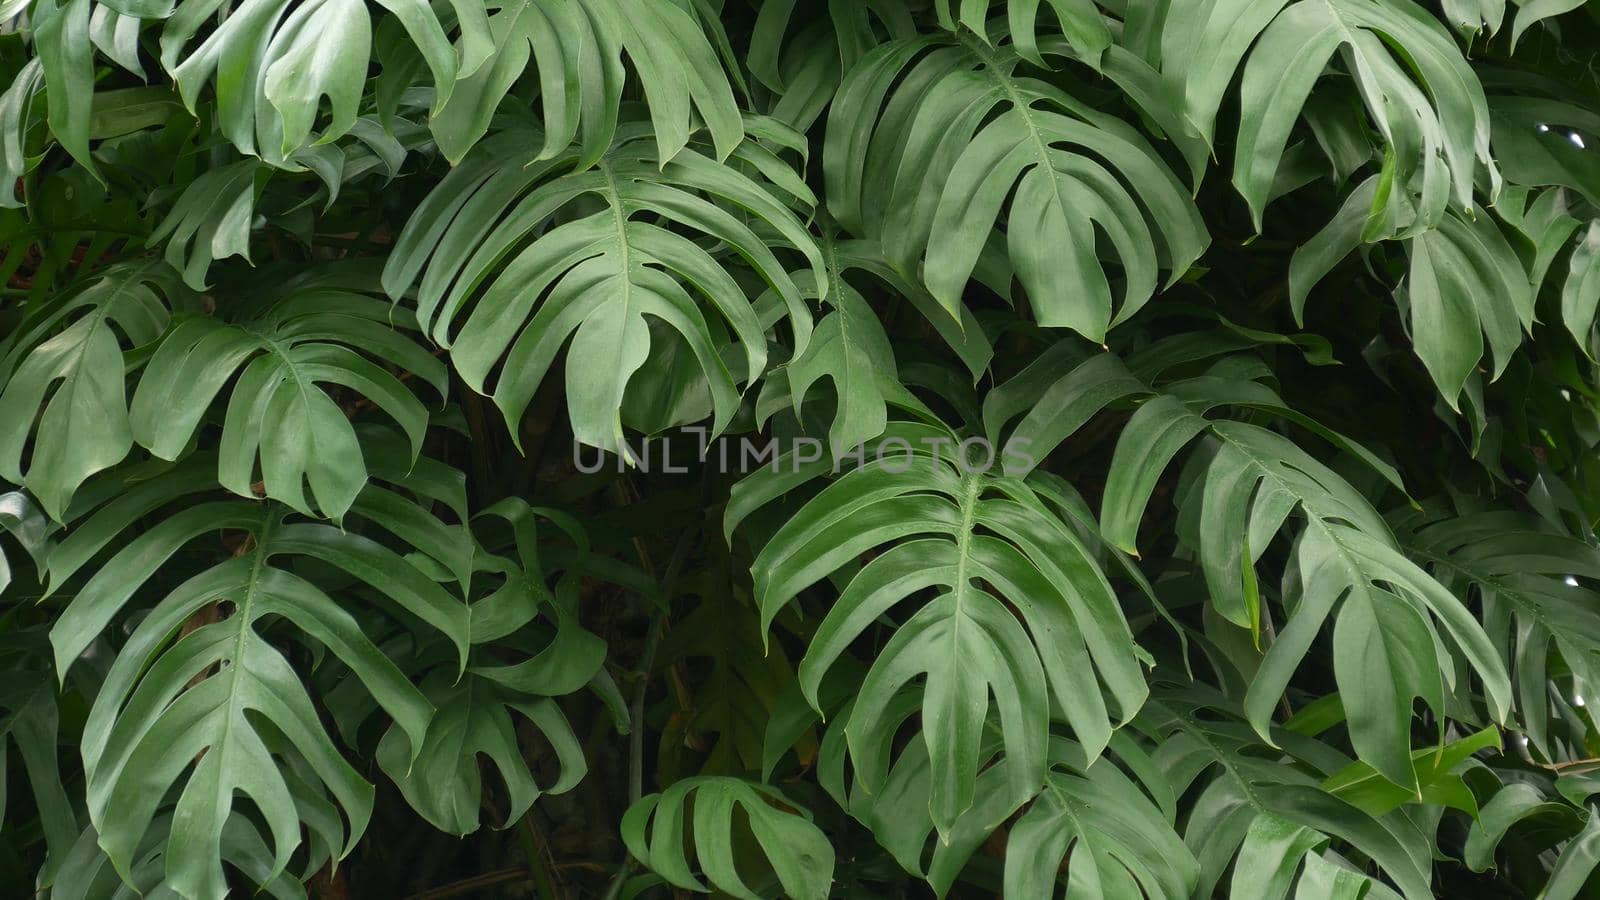 Juicy exotic tropical monstera leaves texture backdrop, copyspace. Lush foliage, greenery in paradise garden. Abstract natural dark green jungle vegetation background pattern, wild summer rain forest